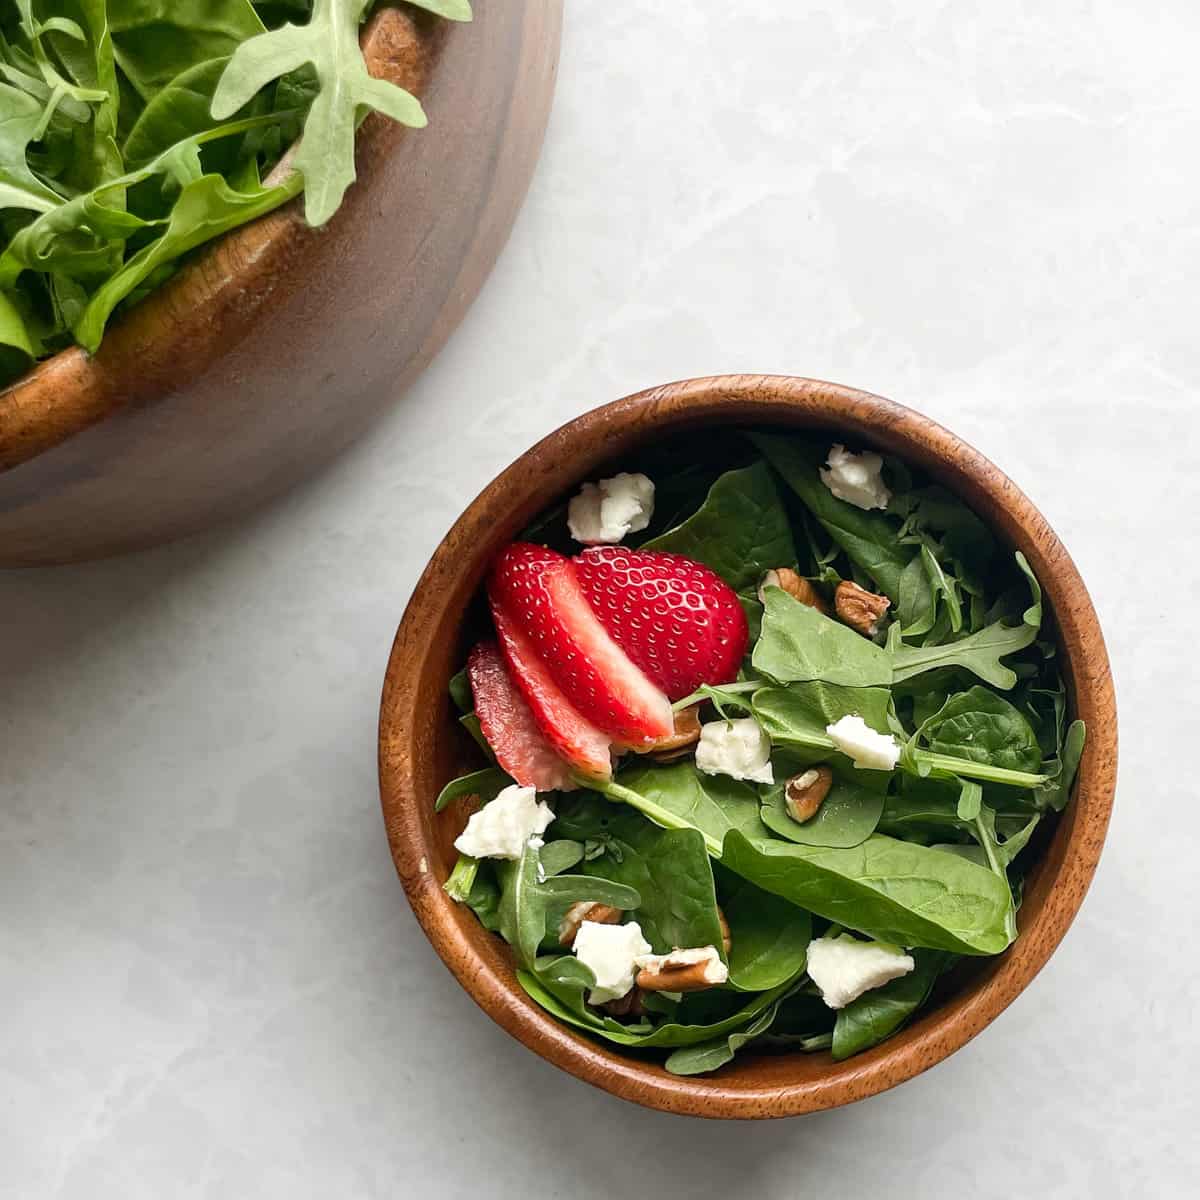 Arugula Spinach Salad with Goat Cheese and Strawberries